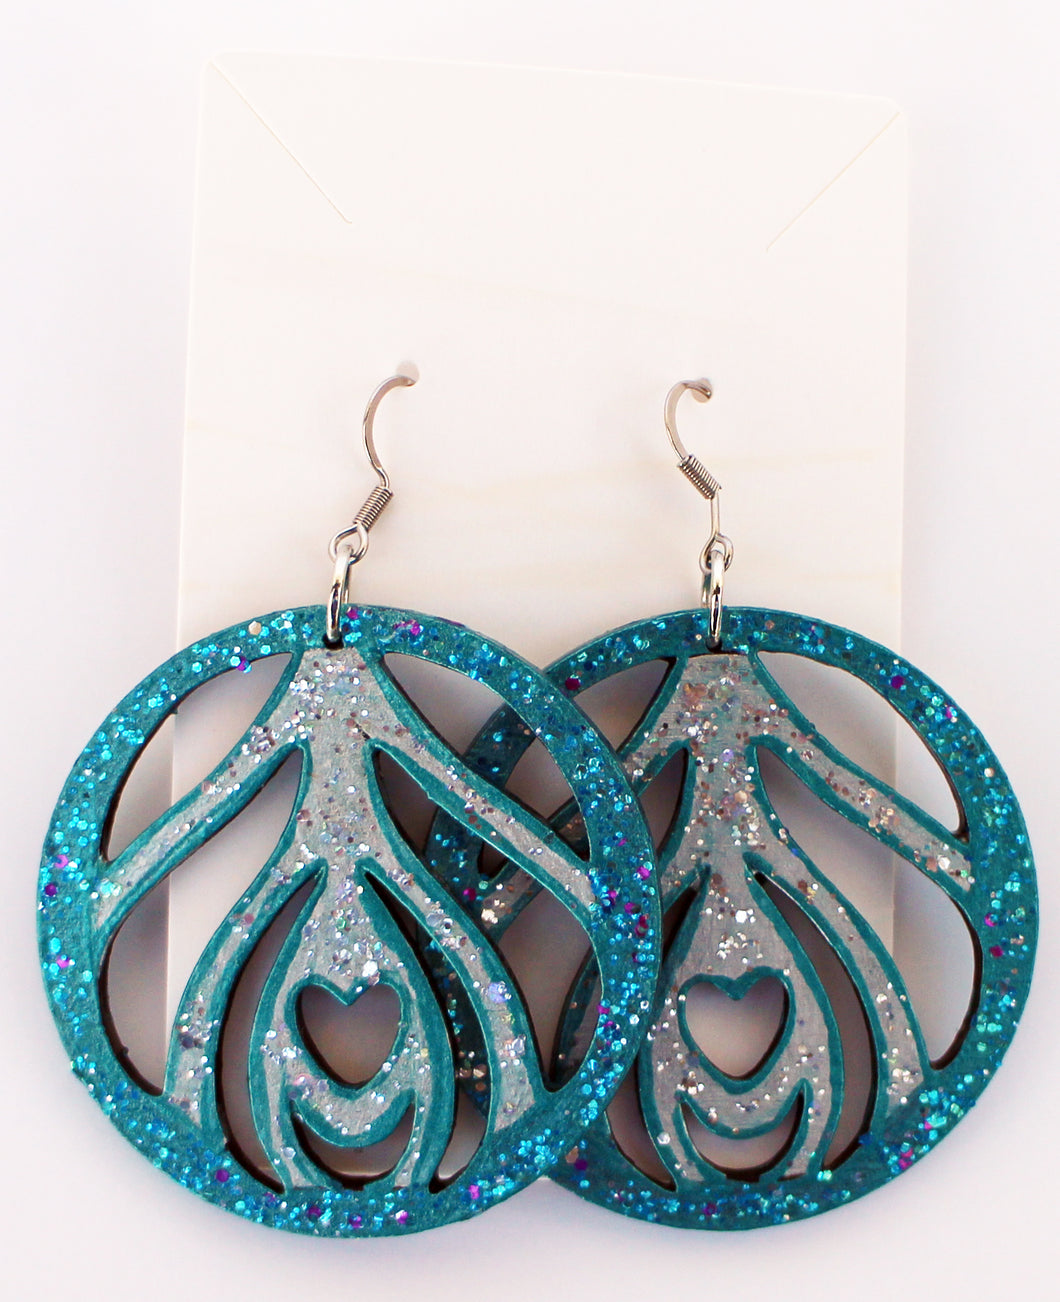 Teal and Silver Hand Painted Sparkly Heart in Circle Earrings